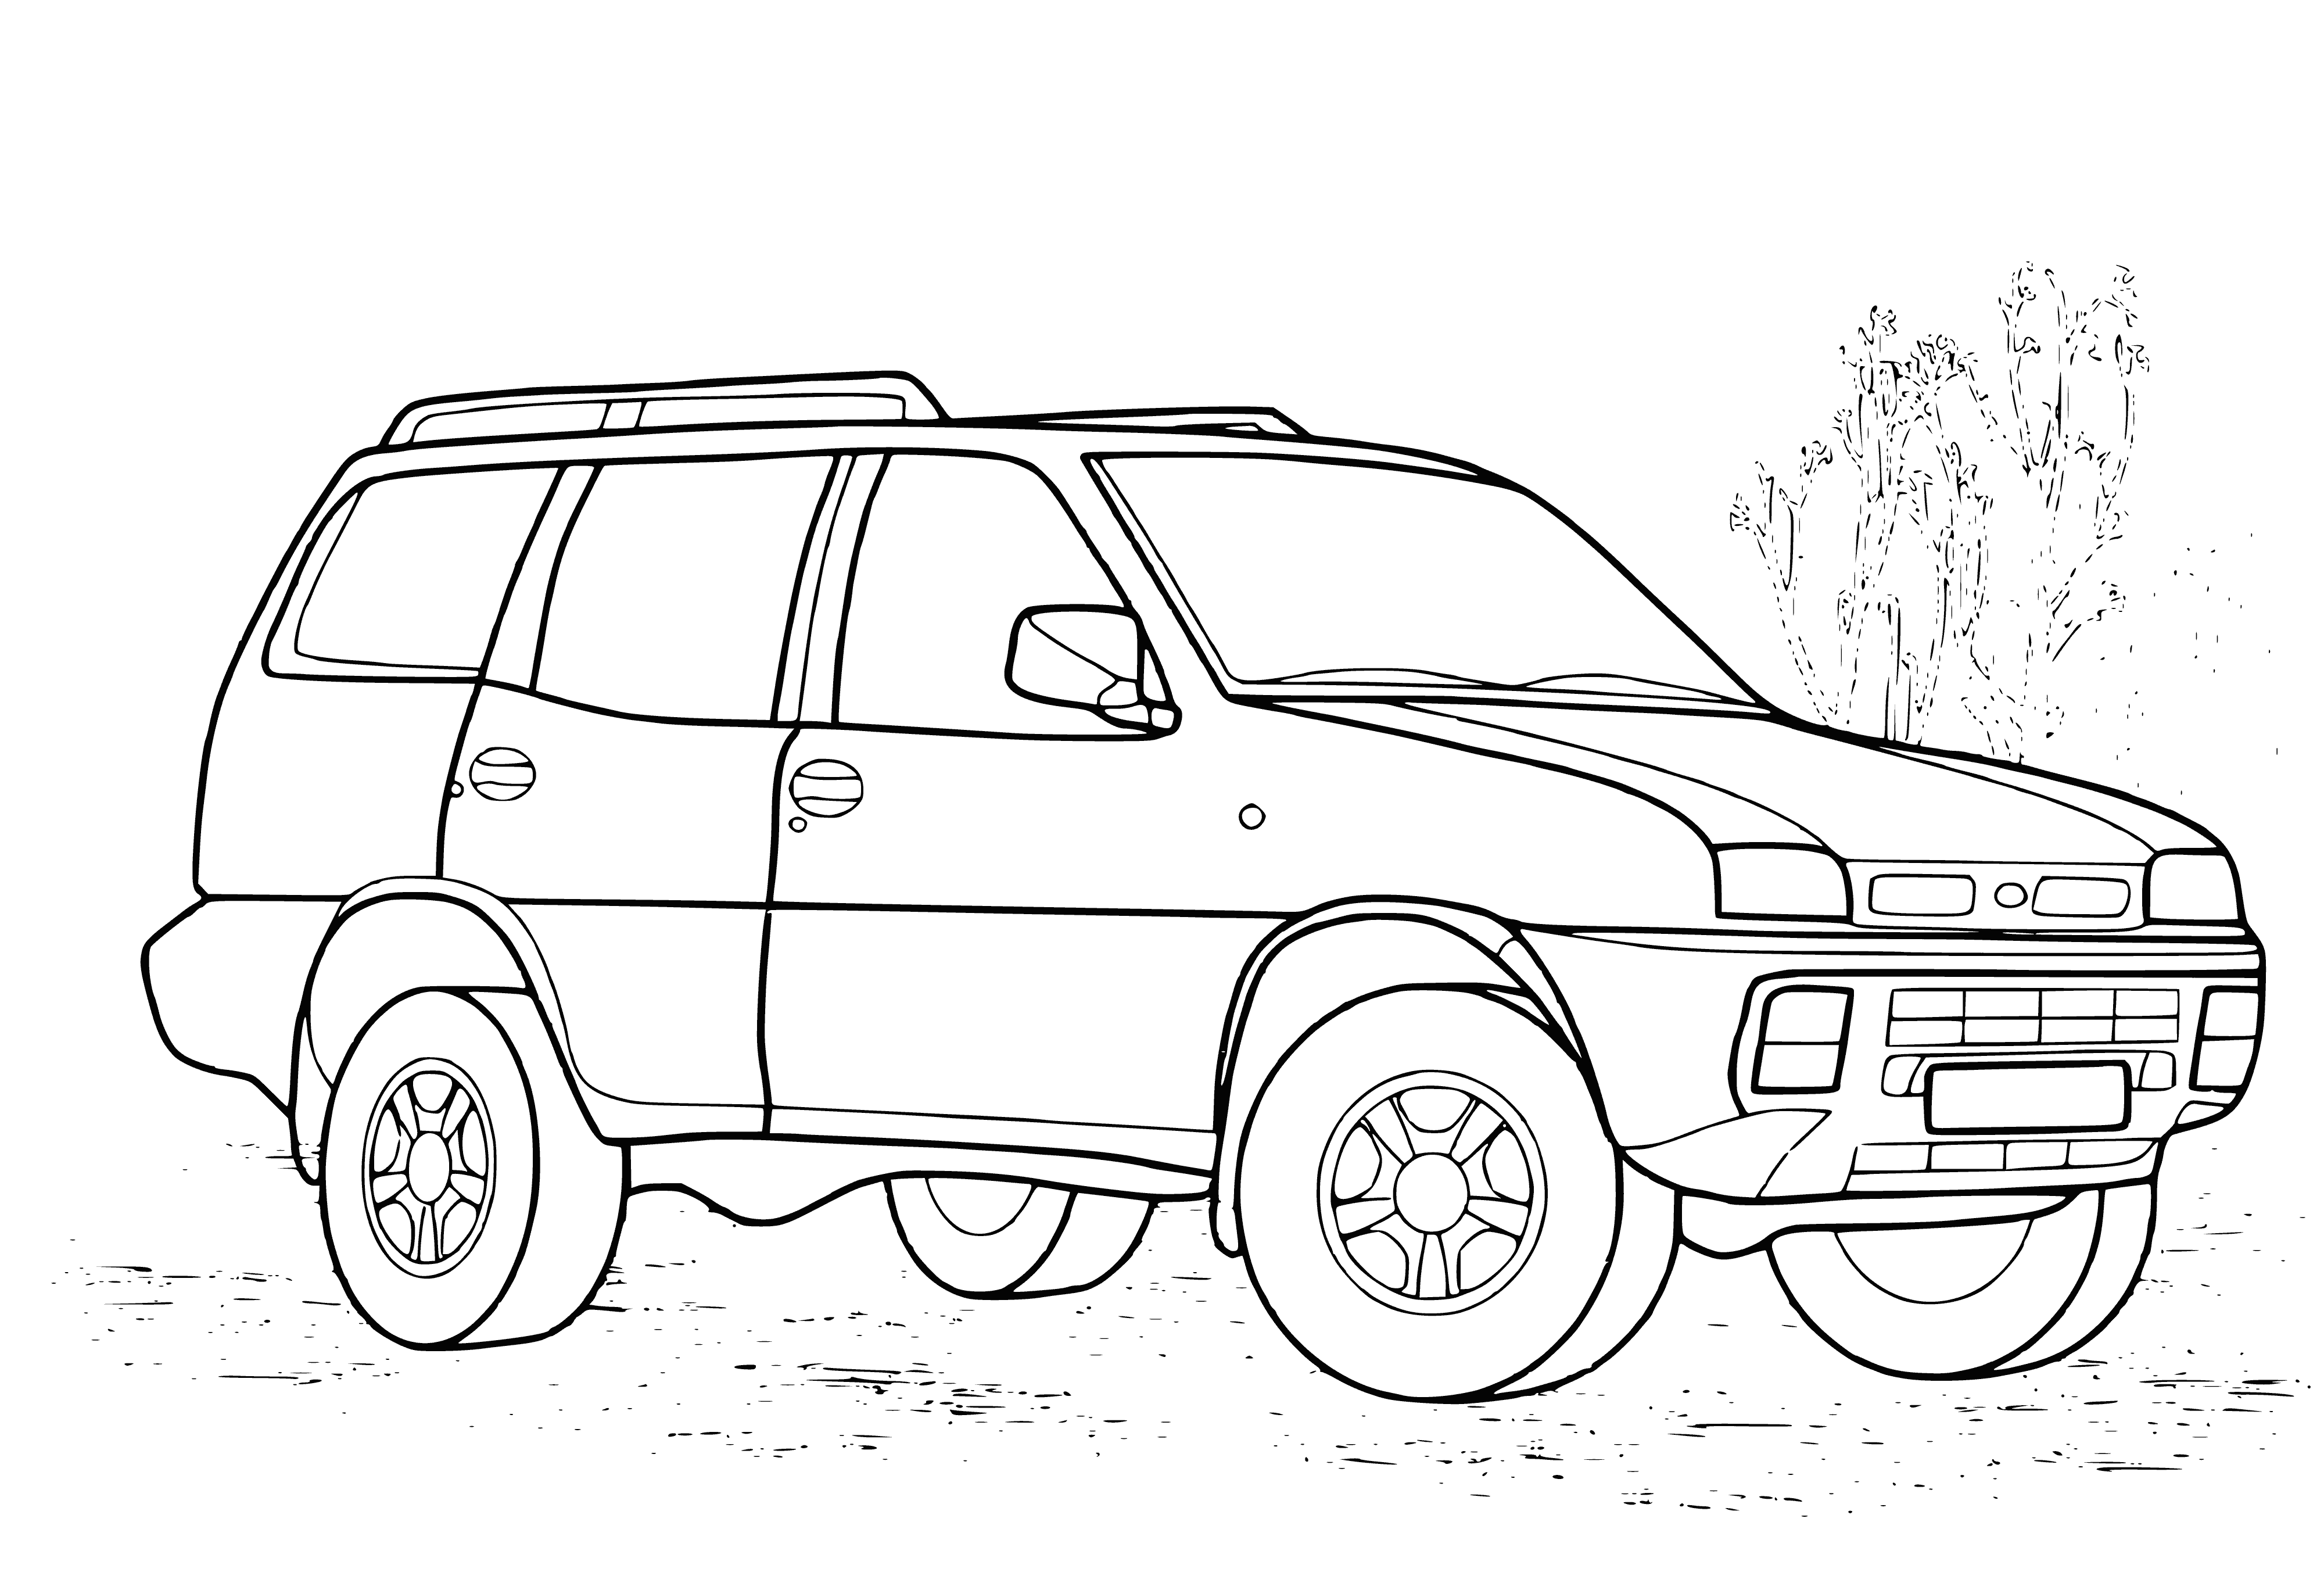 coloring page: A dark Nissan Terrano with tinted windows & a roof rack parked on an asphalt road in front of a large building.